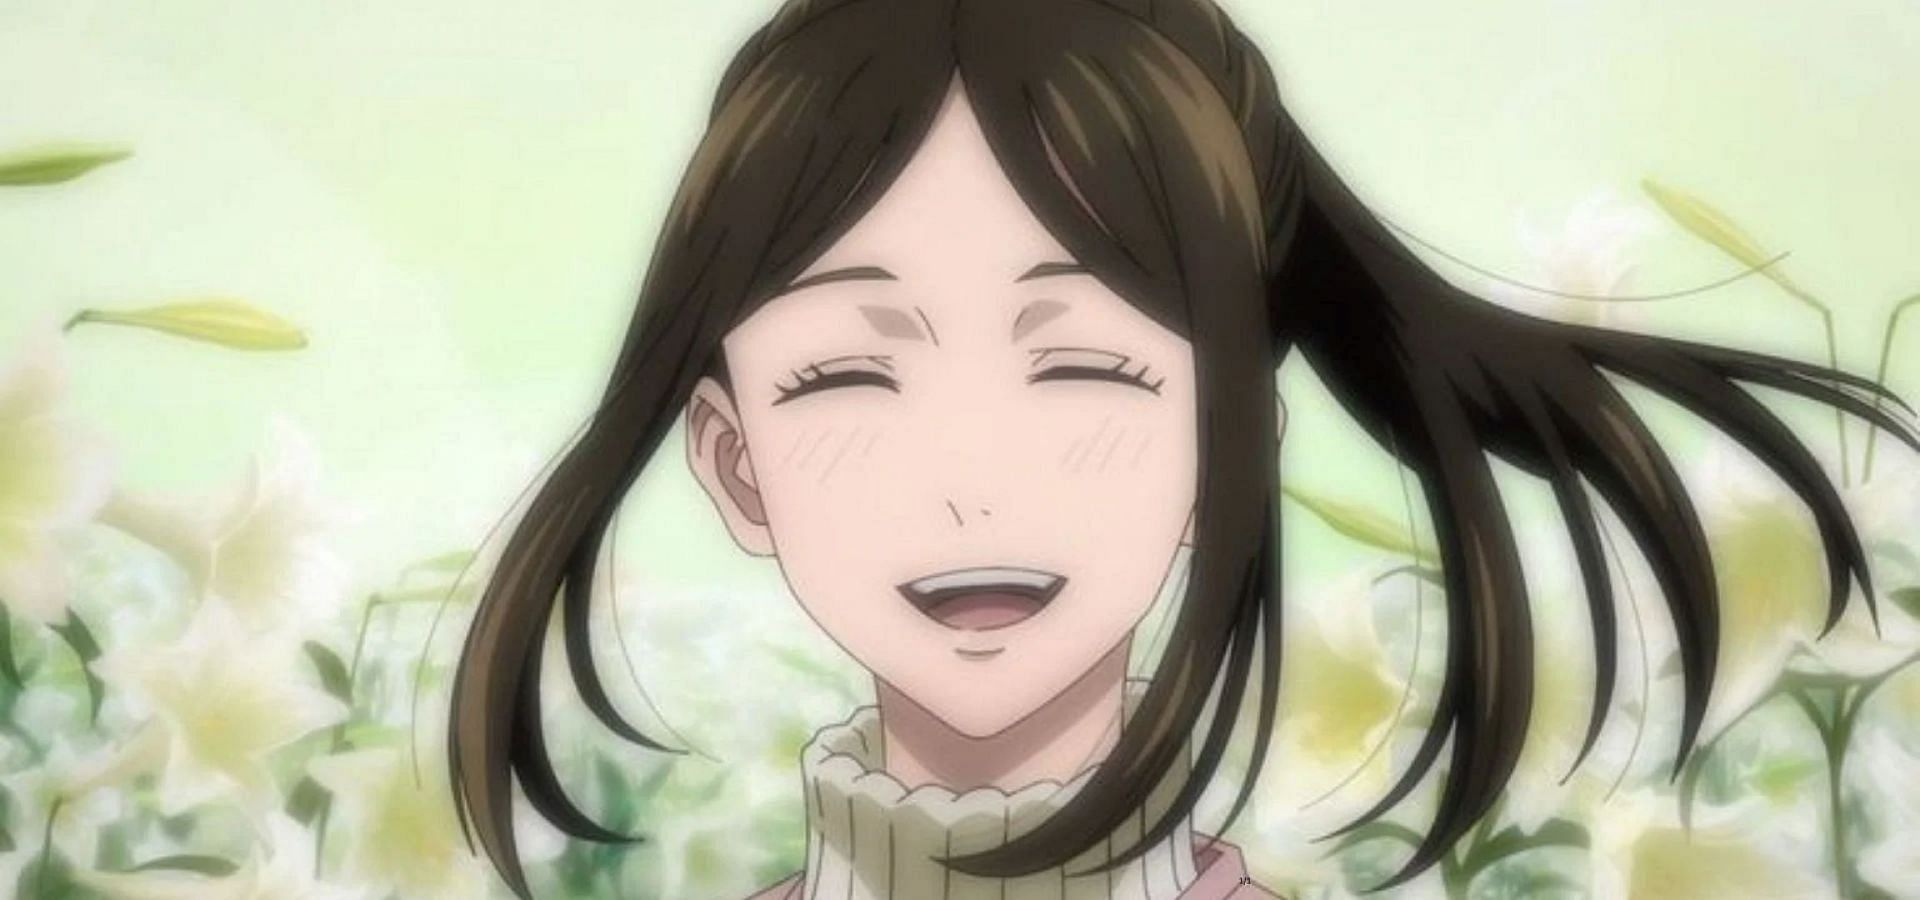 Tsumiki, as seen in the anime (Image via MAPPA)